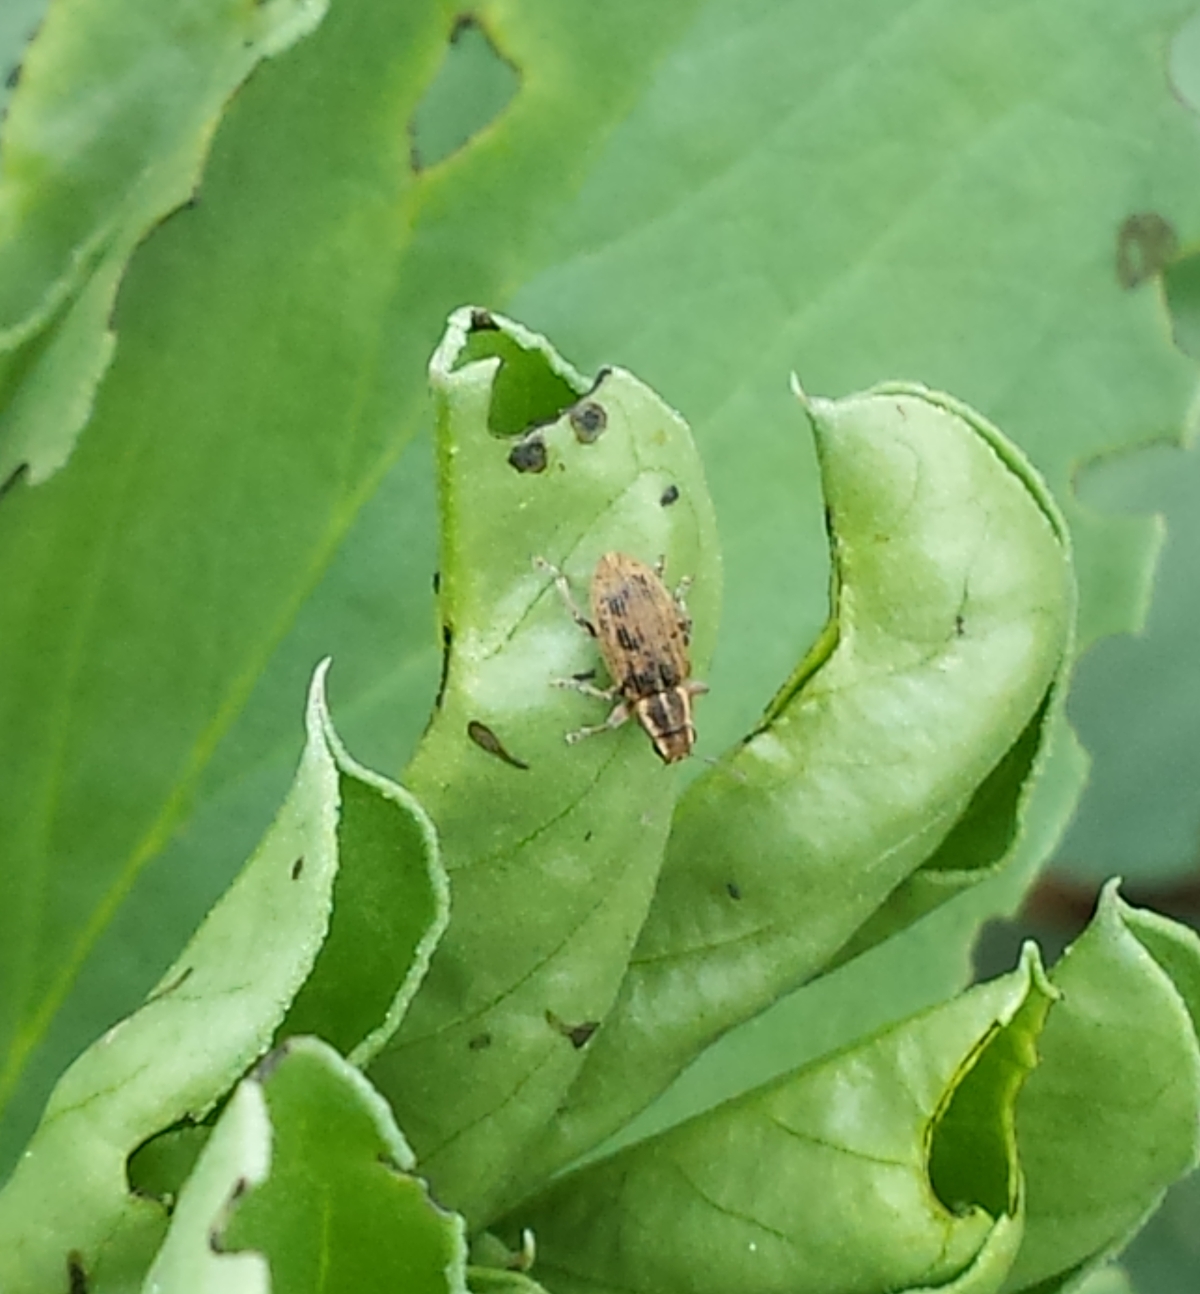 Pea and bean weevil adult in field beans: PheroSyn Awarded Grant for Novel Pheromone Development